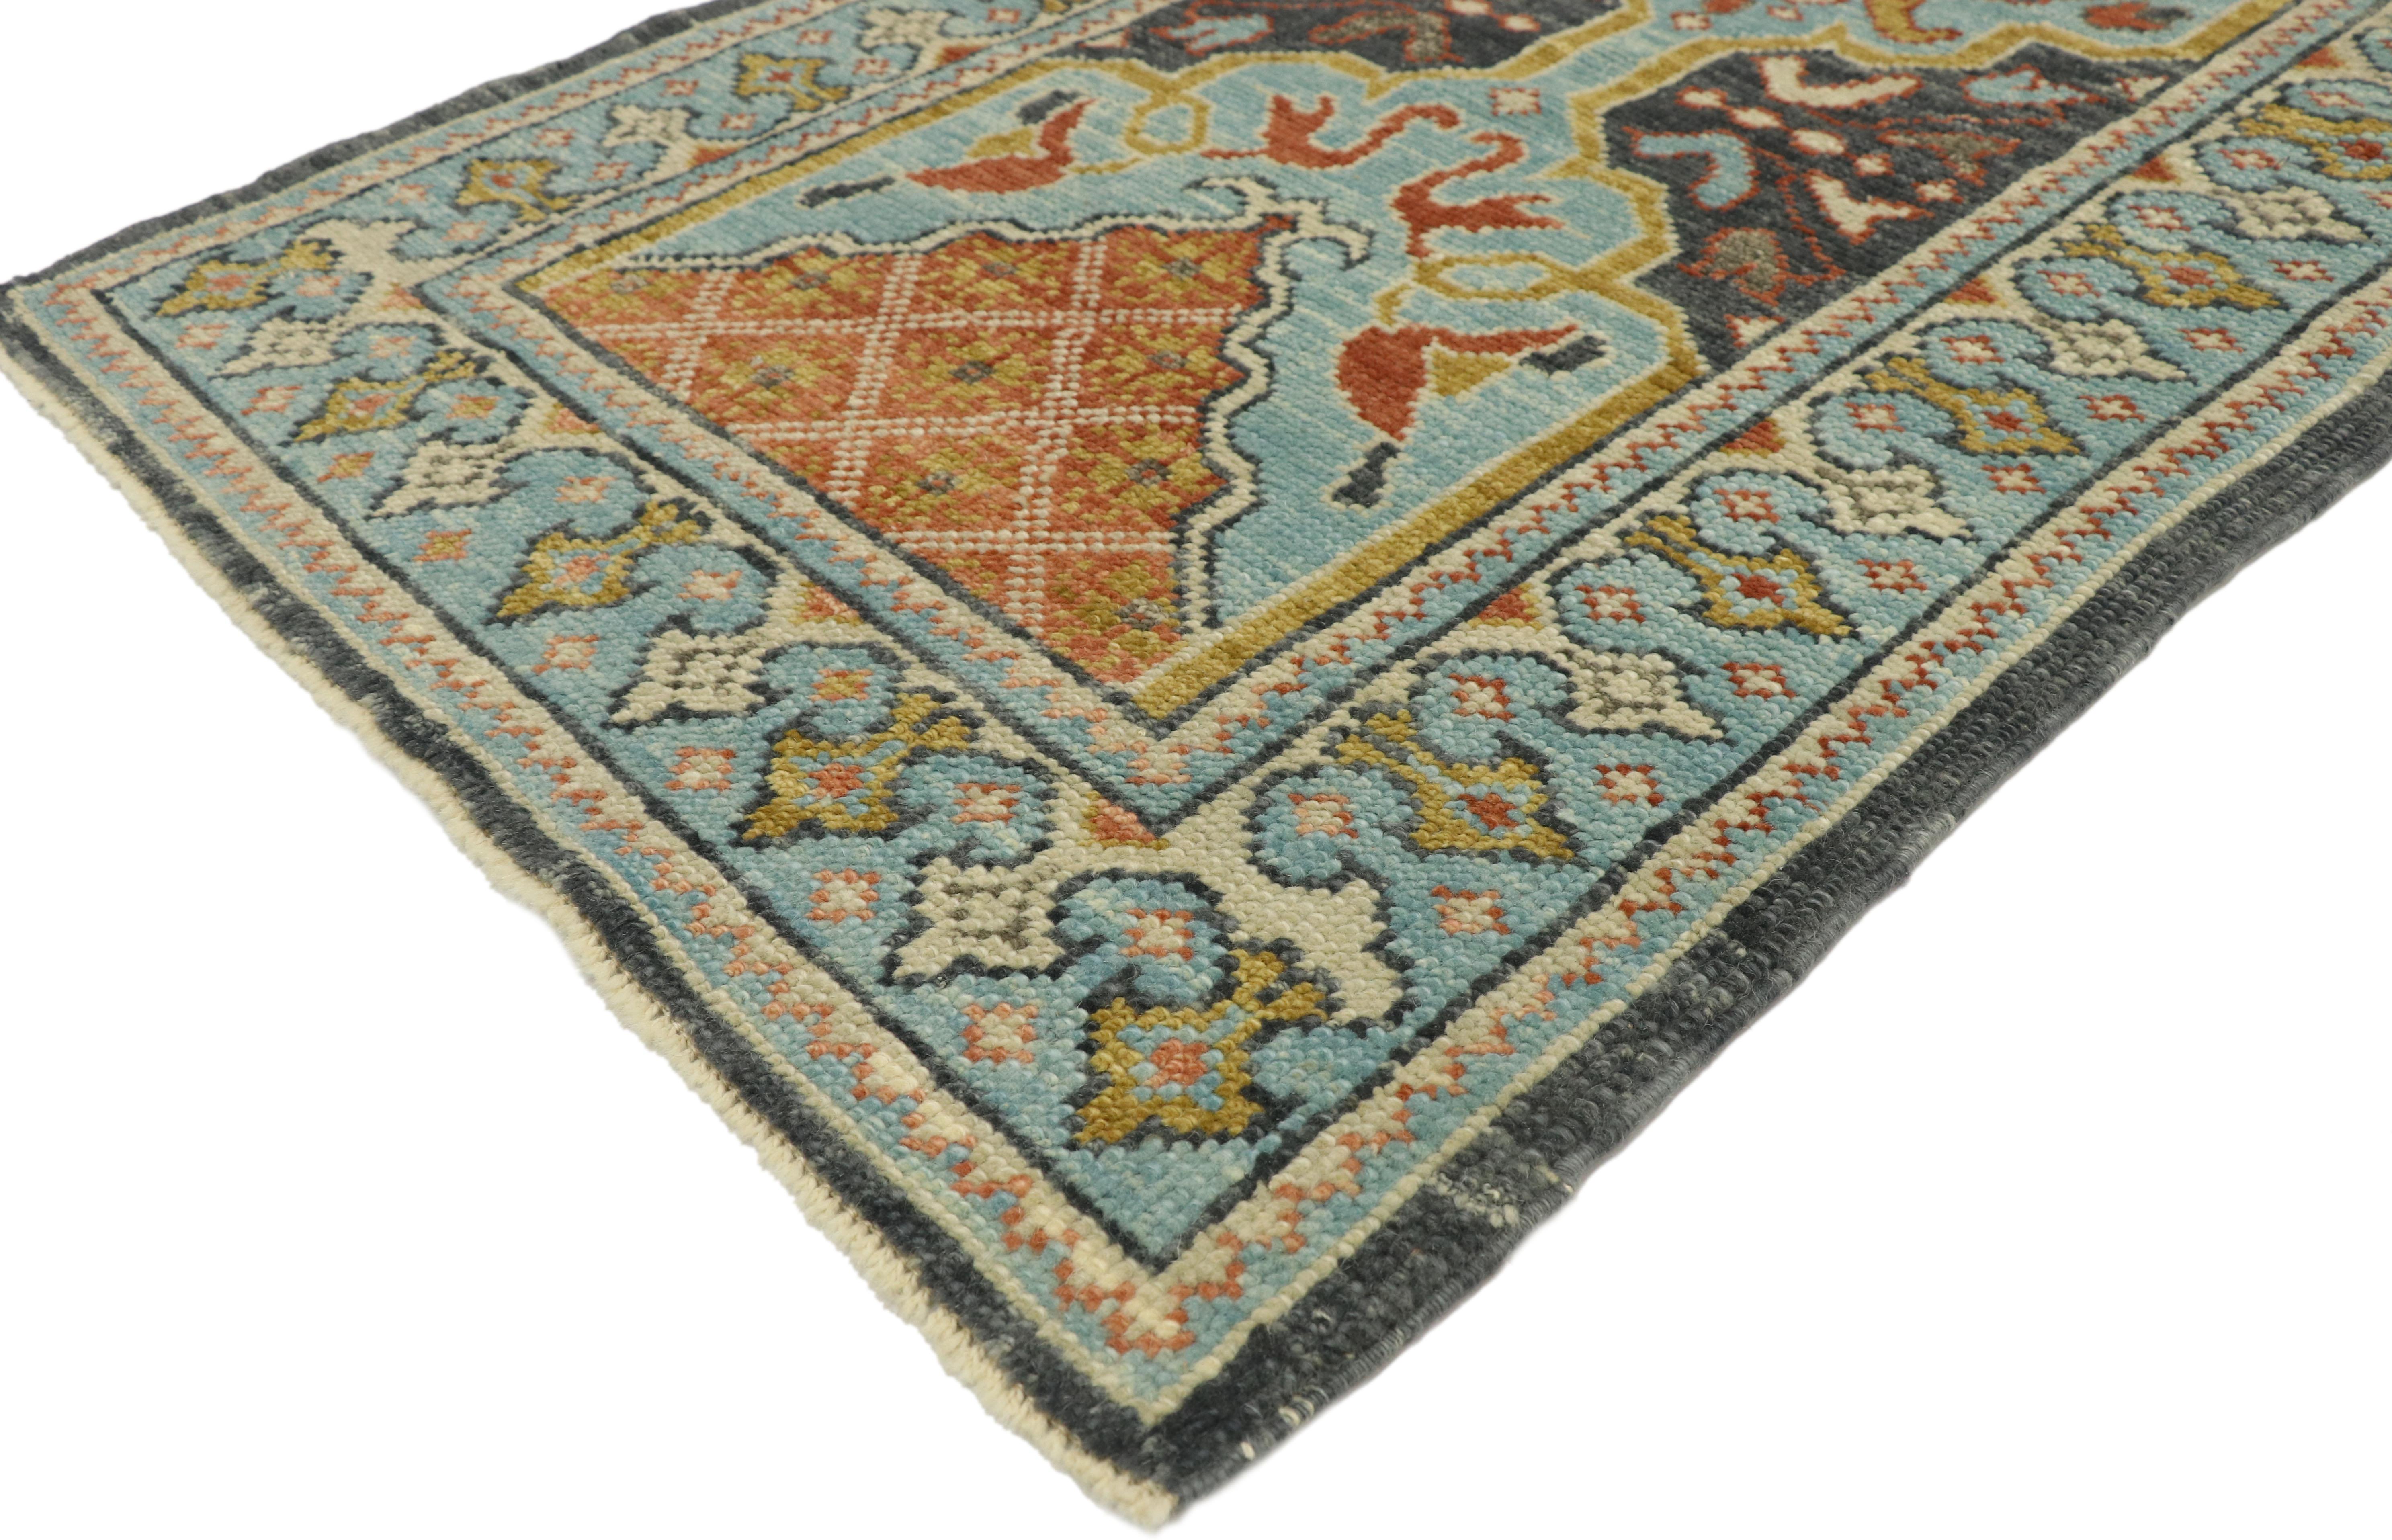 52825 new contemporary Turkish Oushak runner with modern Italian cottage style. With brilliant sky blues and warm terracotta hues inspired by Italy, this hand knotted wool new contemporary Turkish Oushak runner beautifully embodies an Italian